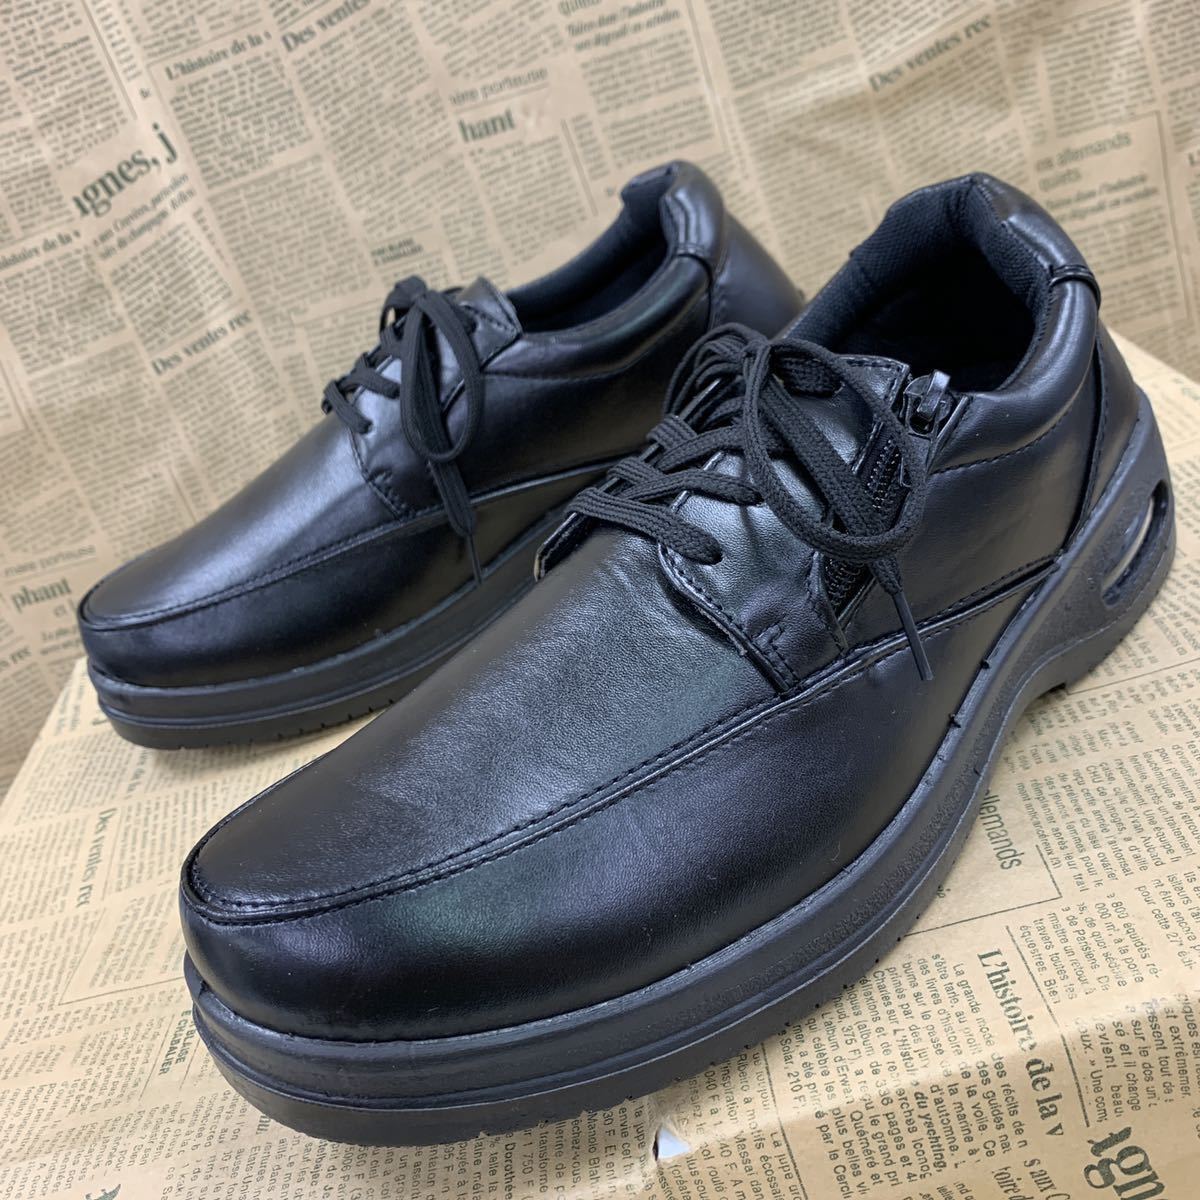  new goods men's 25.0cm light weight wide width air saw ru business shoes fake leather shoes water-repellent shoes business sneakers black black osw101